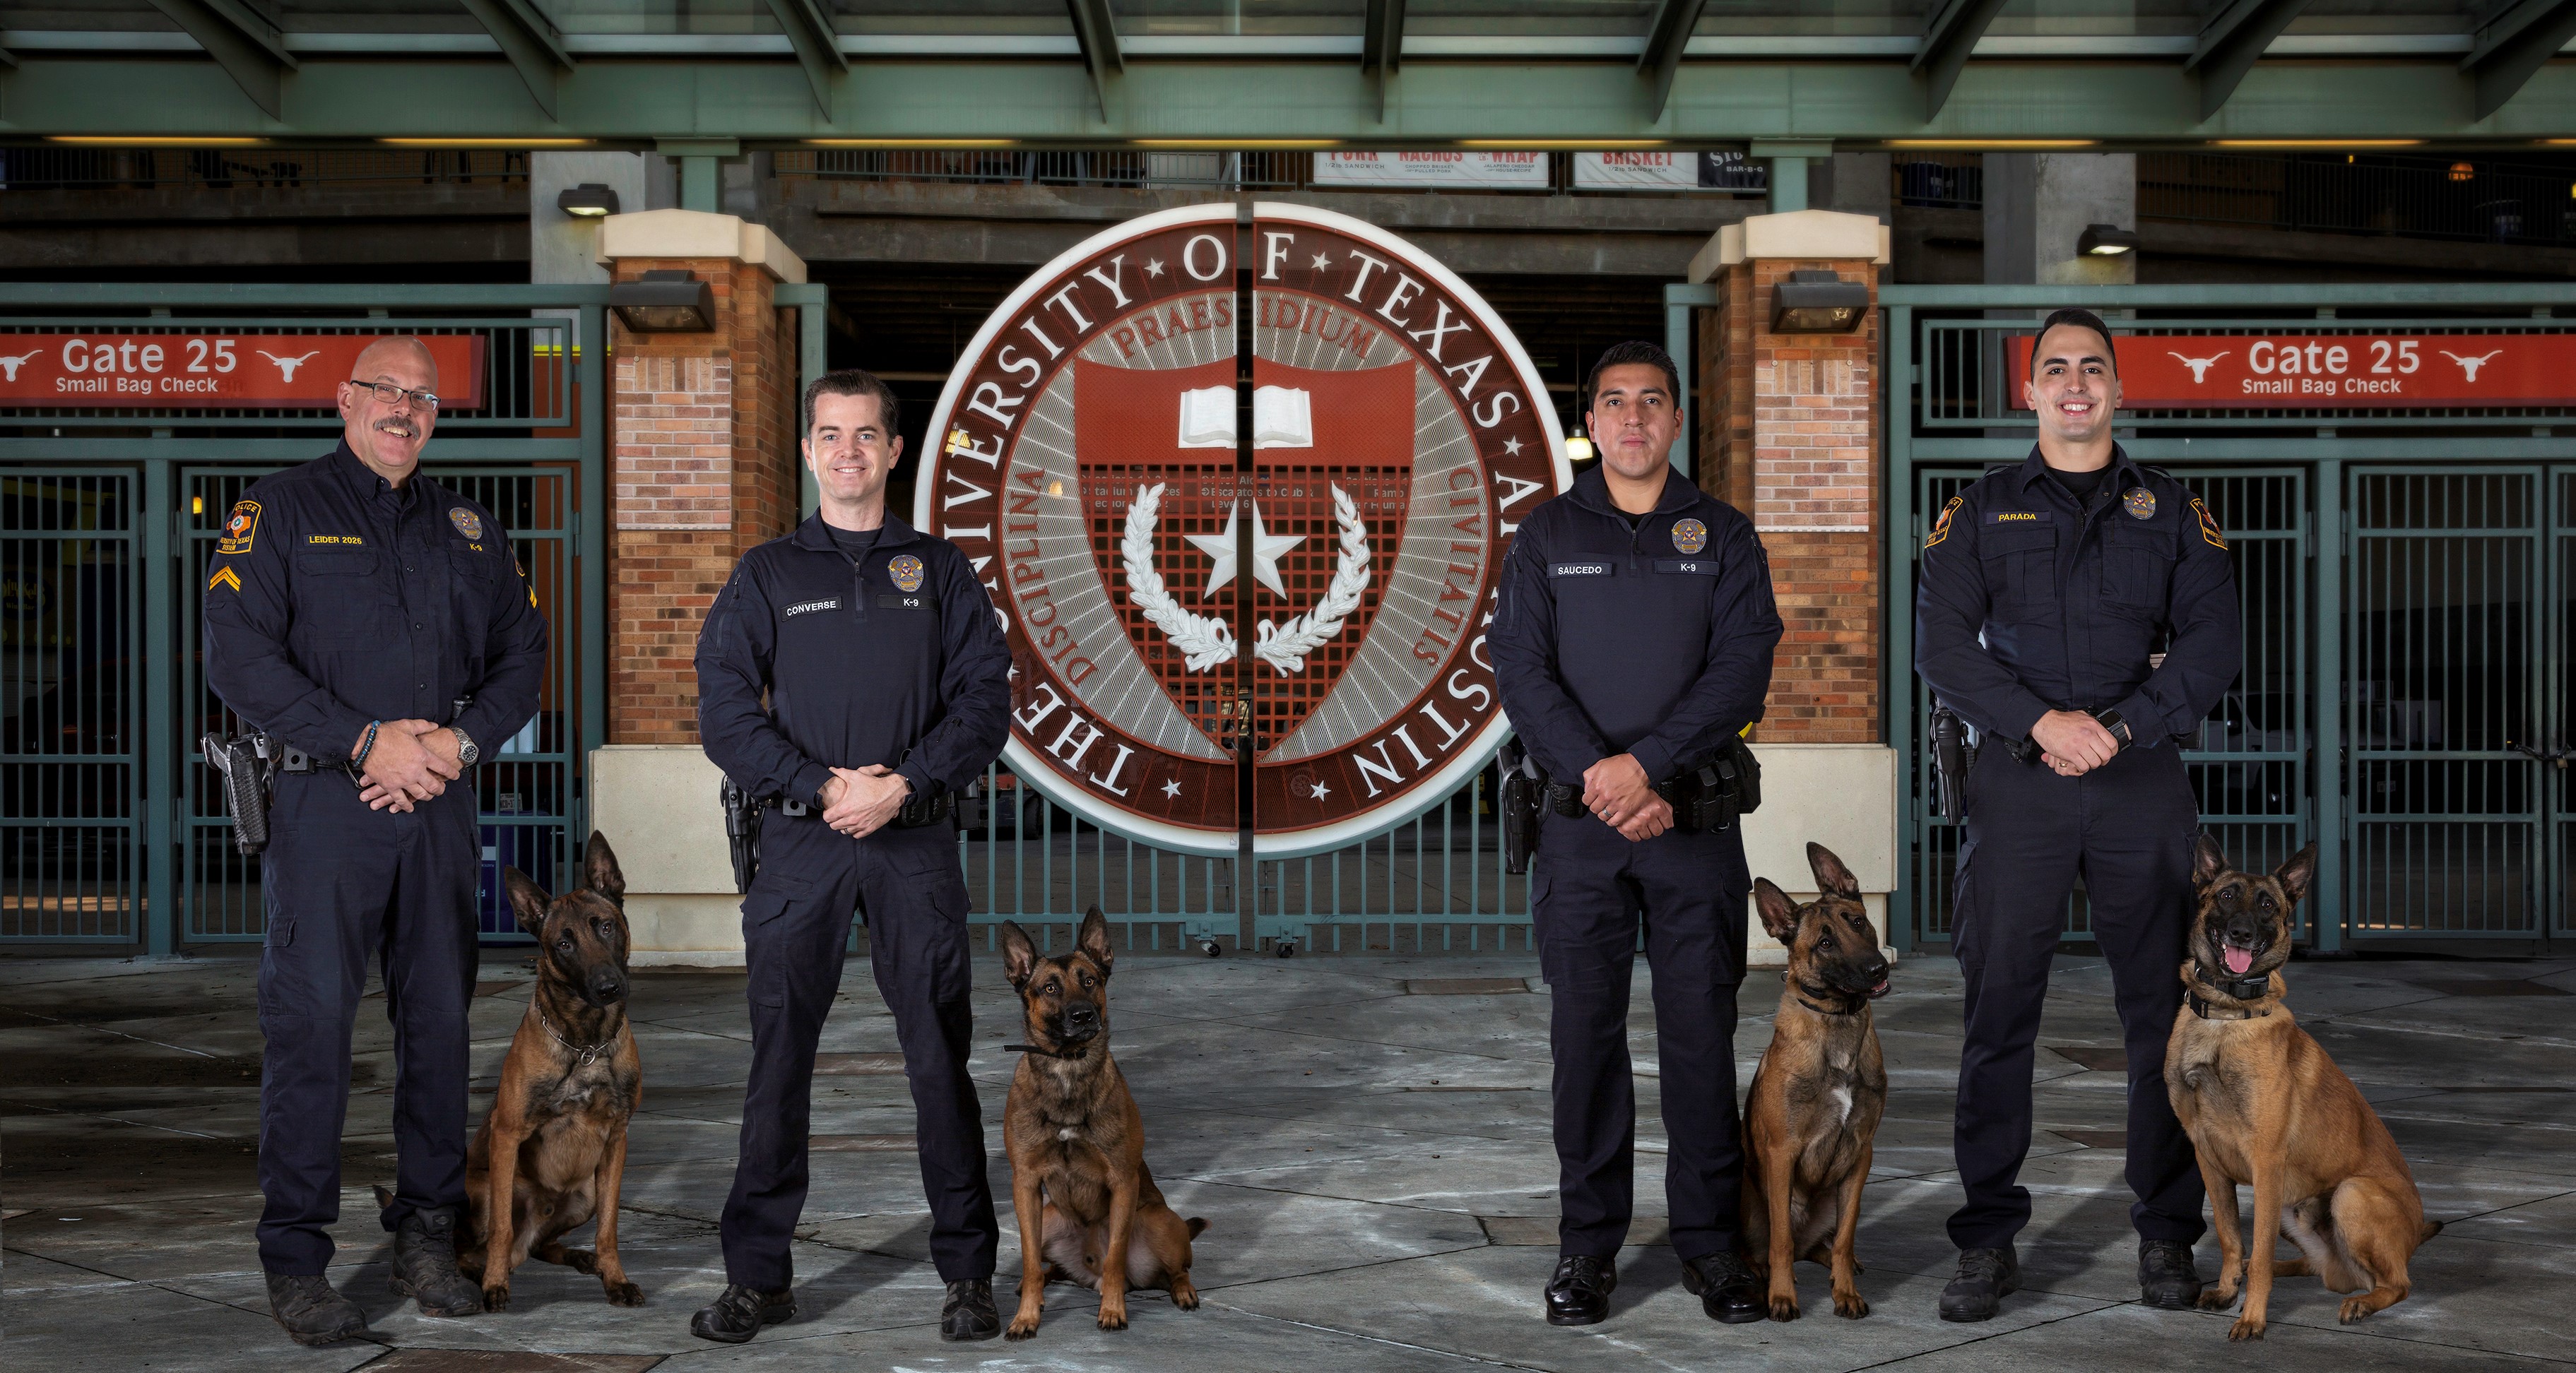 K9 officers and dogs standing for a photo